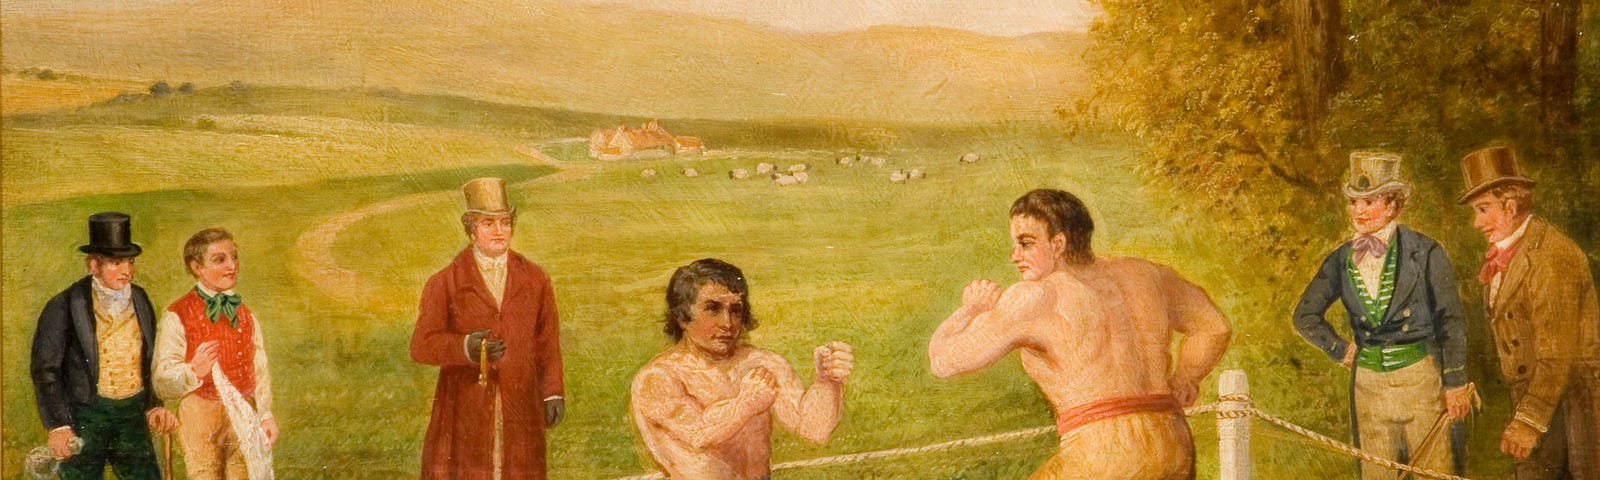 A painting of bare-nuckle boxers from yesteryear fighting, with several men watching